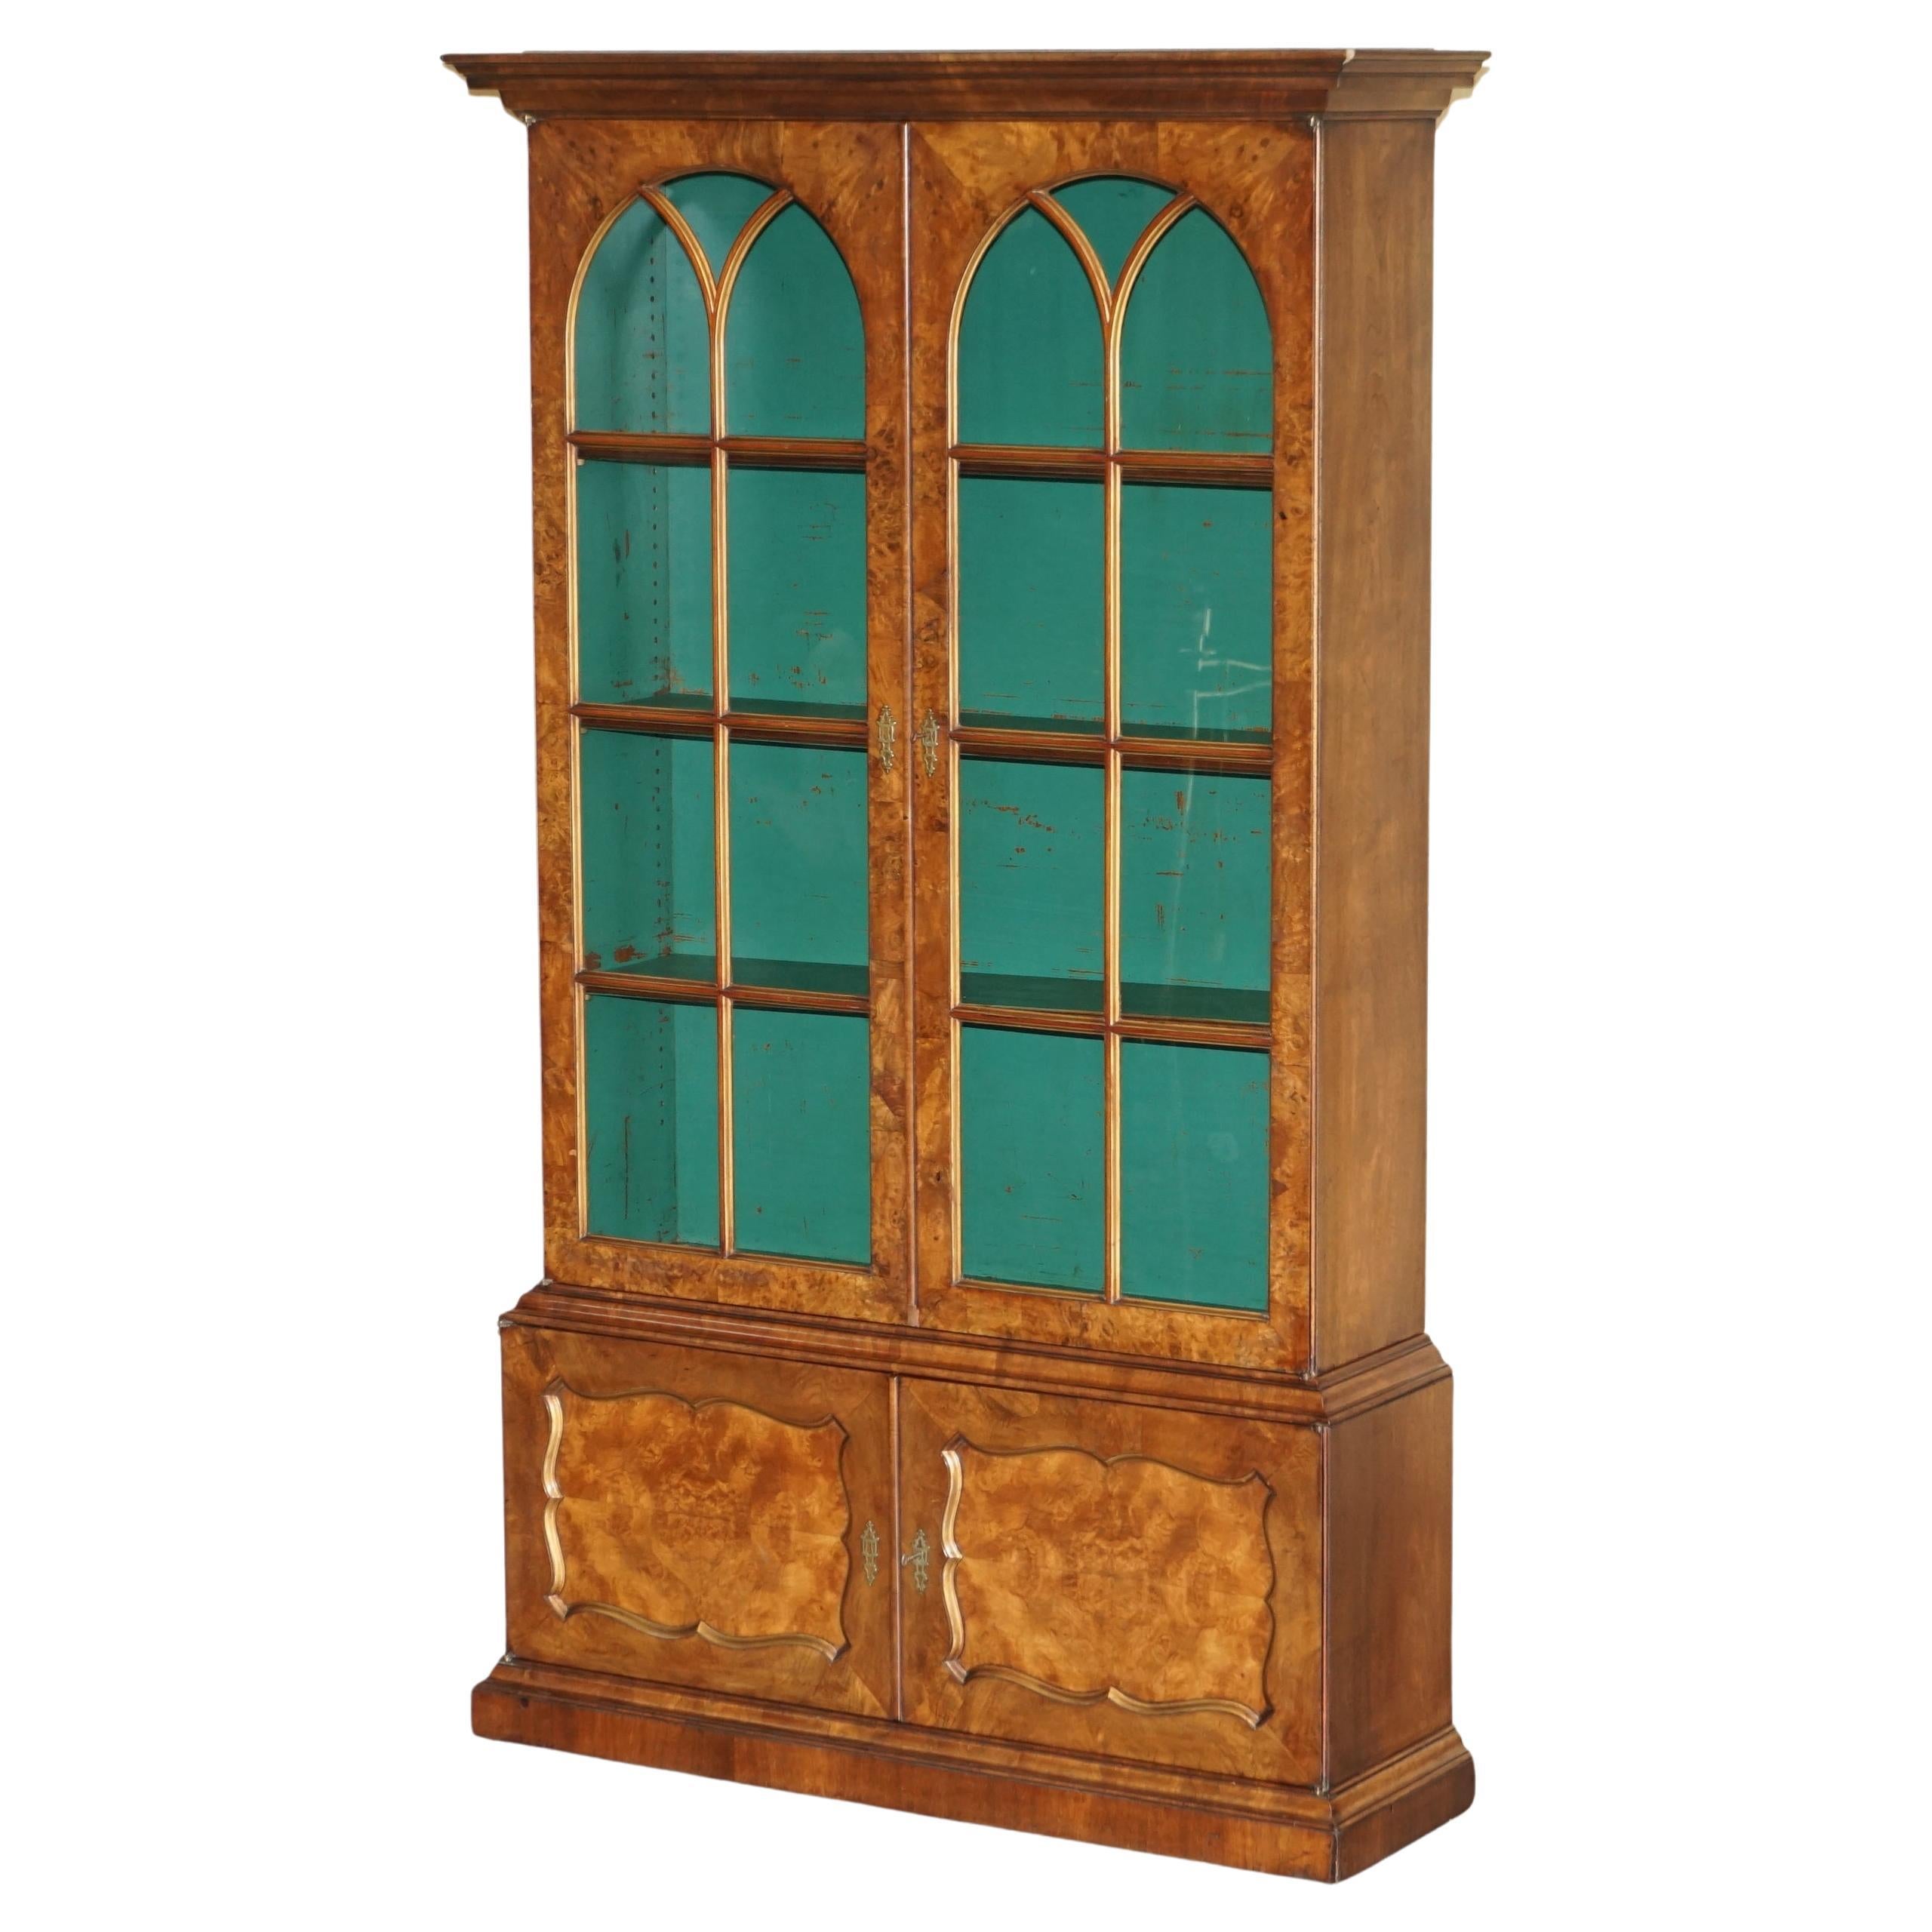 Sublime Antique Victorian Burr Walnut Library Bookcase with Gothic Glazed Doors For Sale